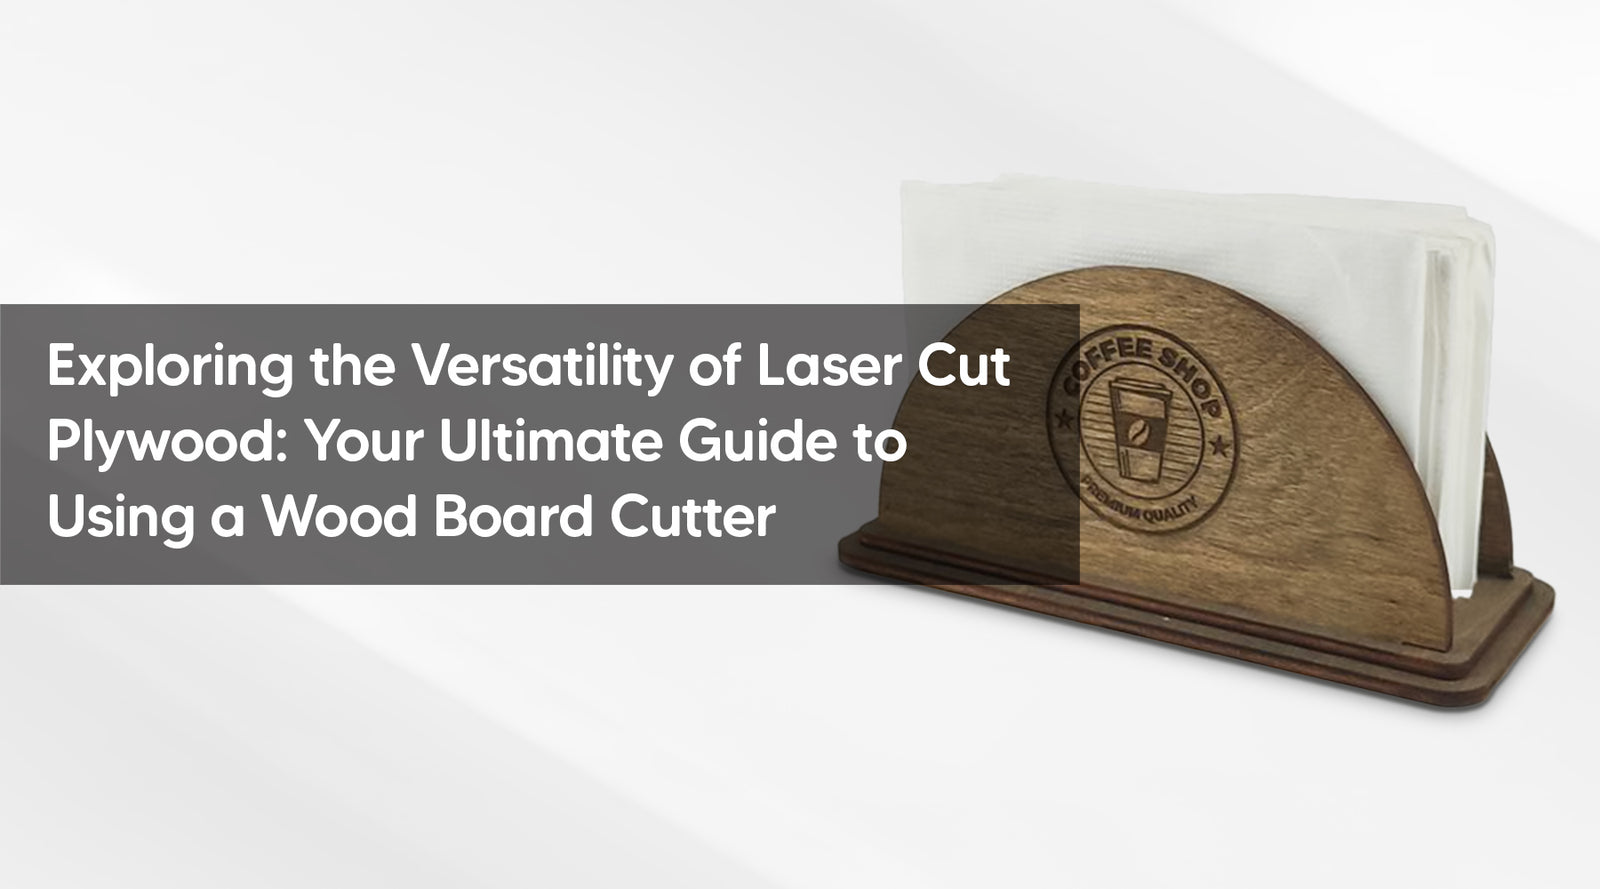 Exploring the Versatility of Laser Cut Plywood: Your Ultimate Guide to Using a Wood Board Cutter